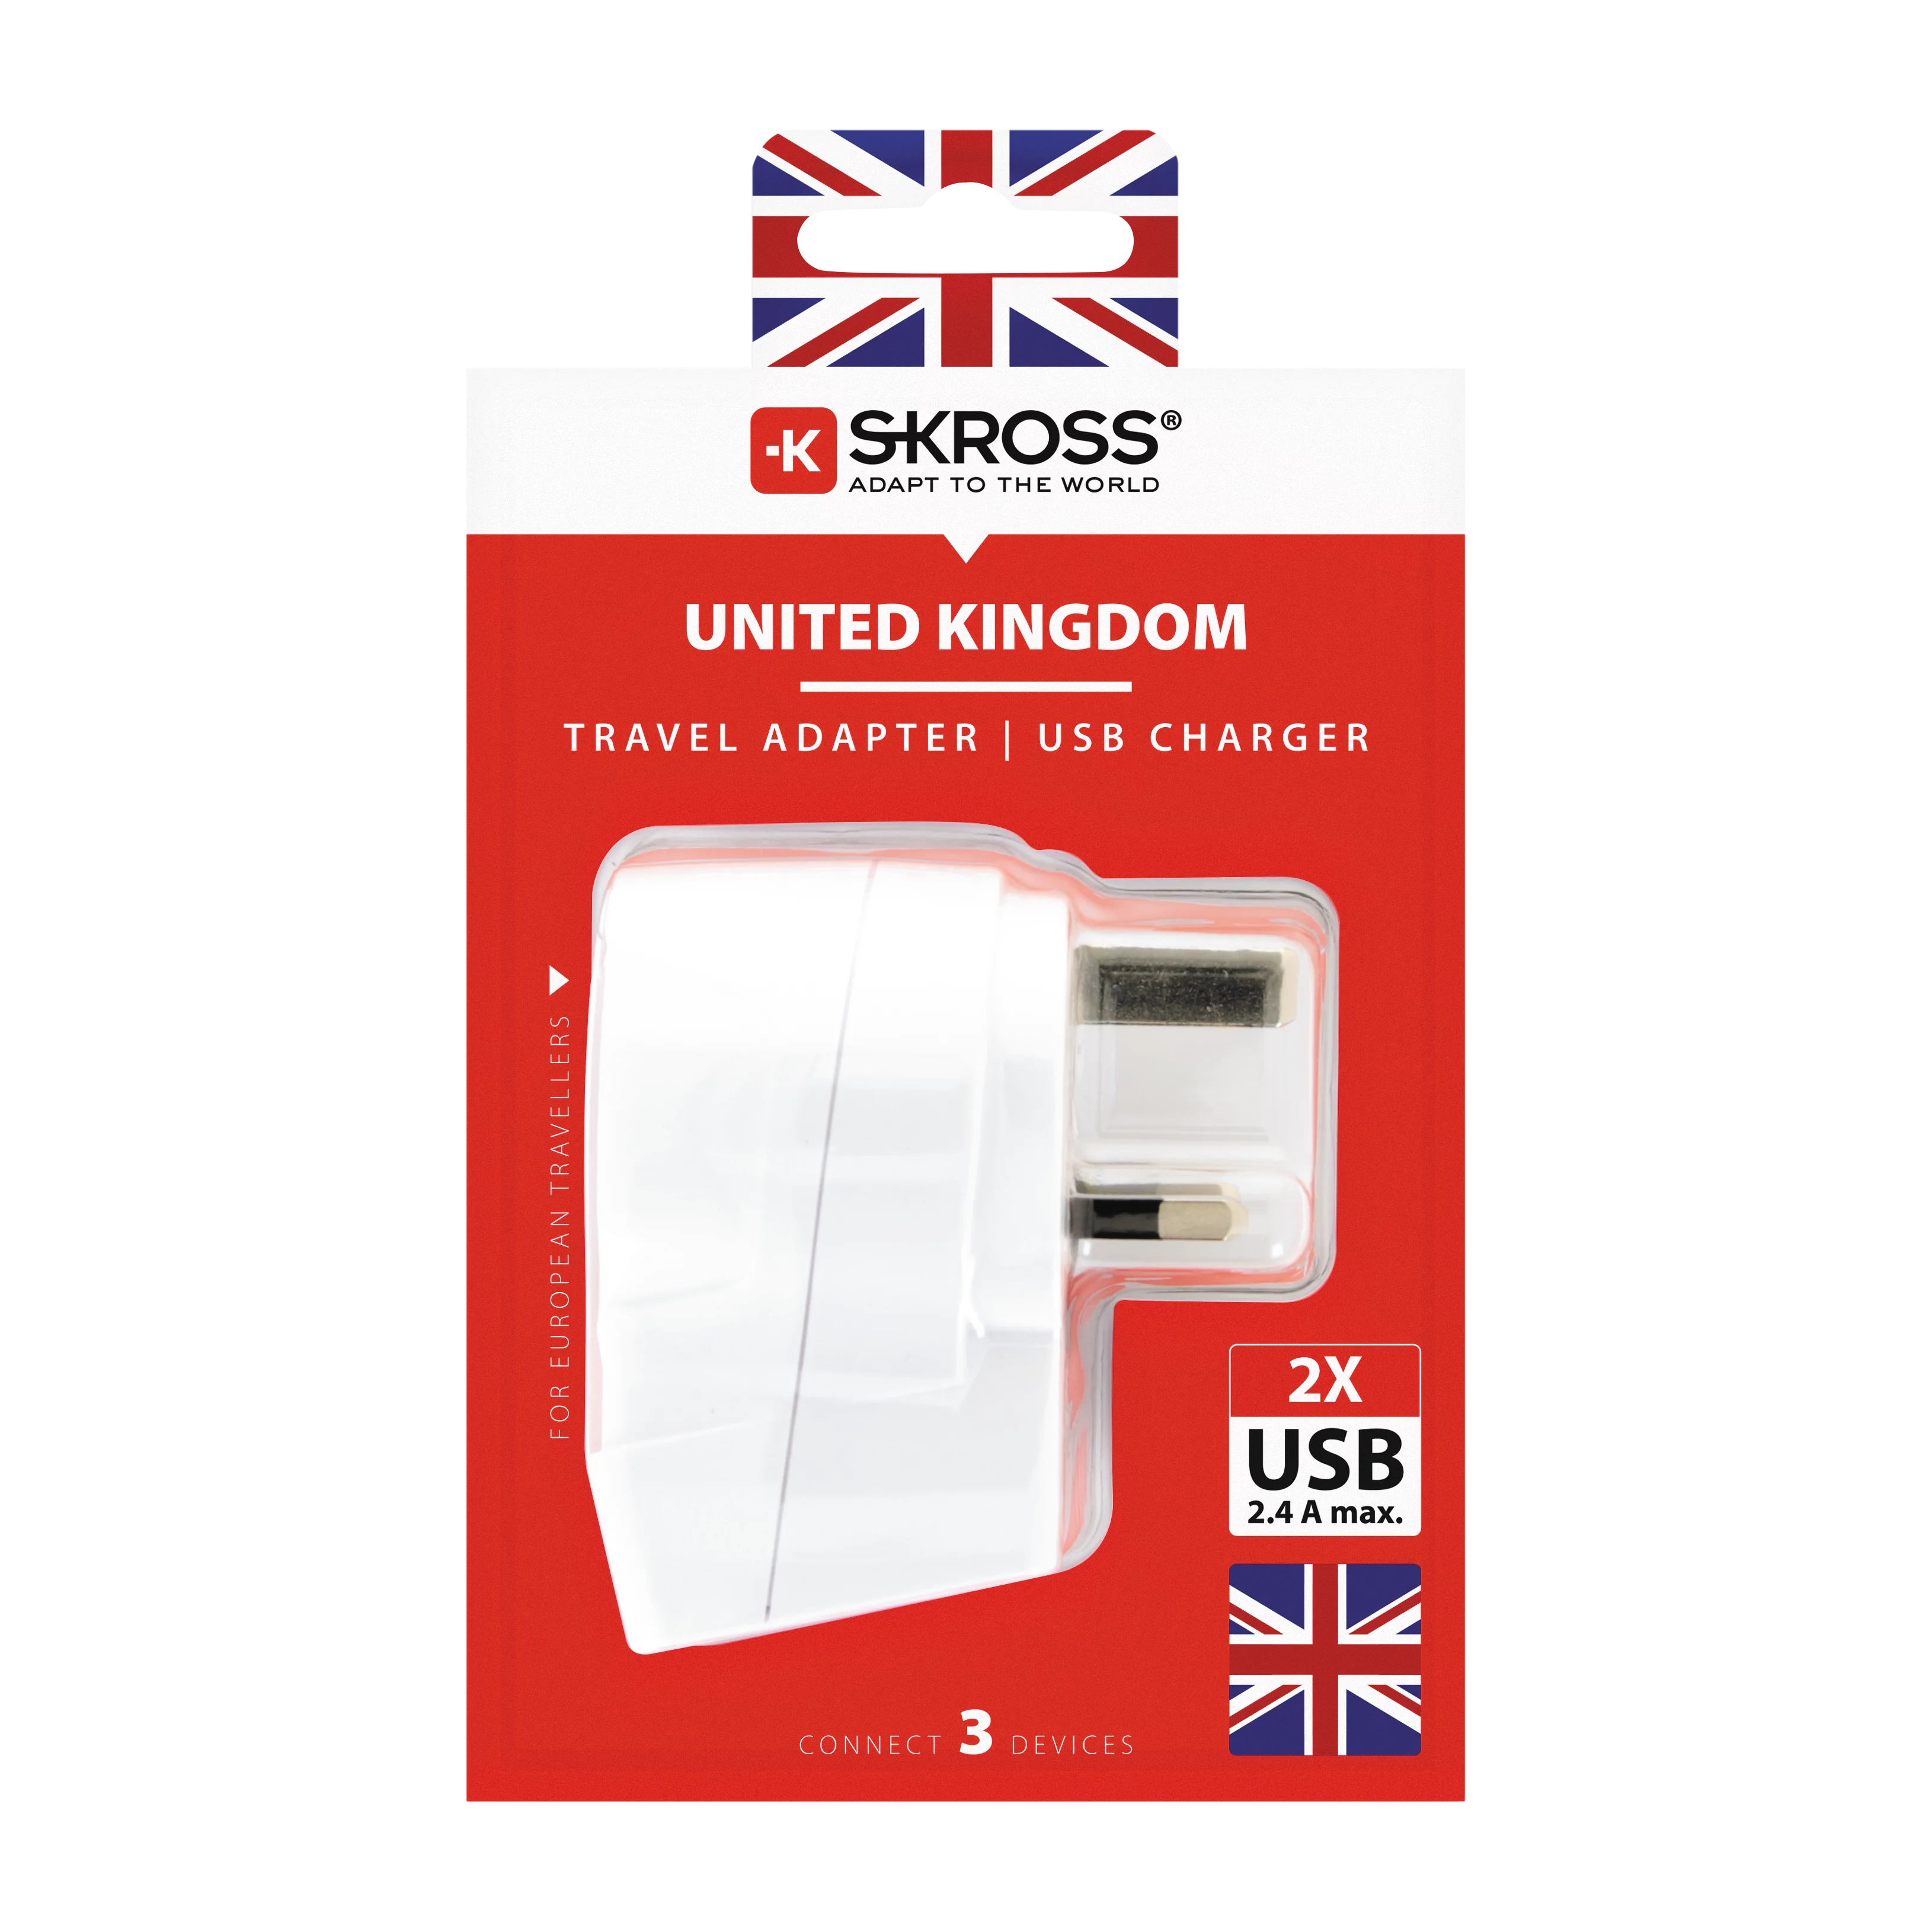 Europeans Travel to the UK with 2 USB ports